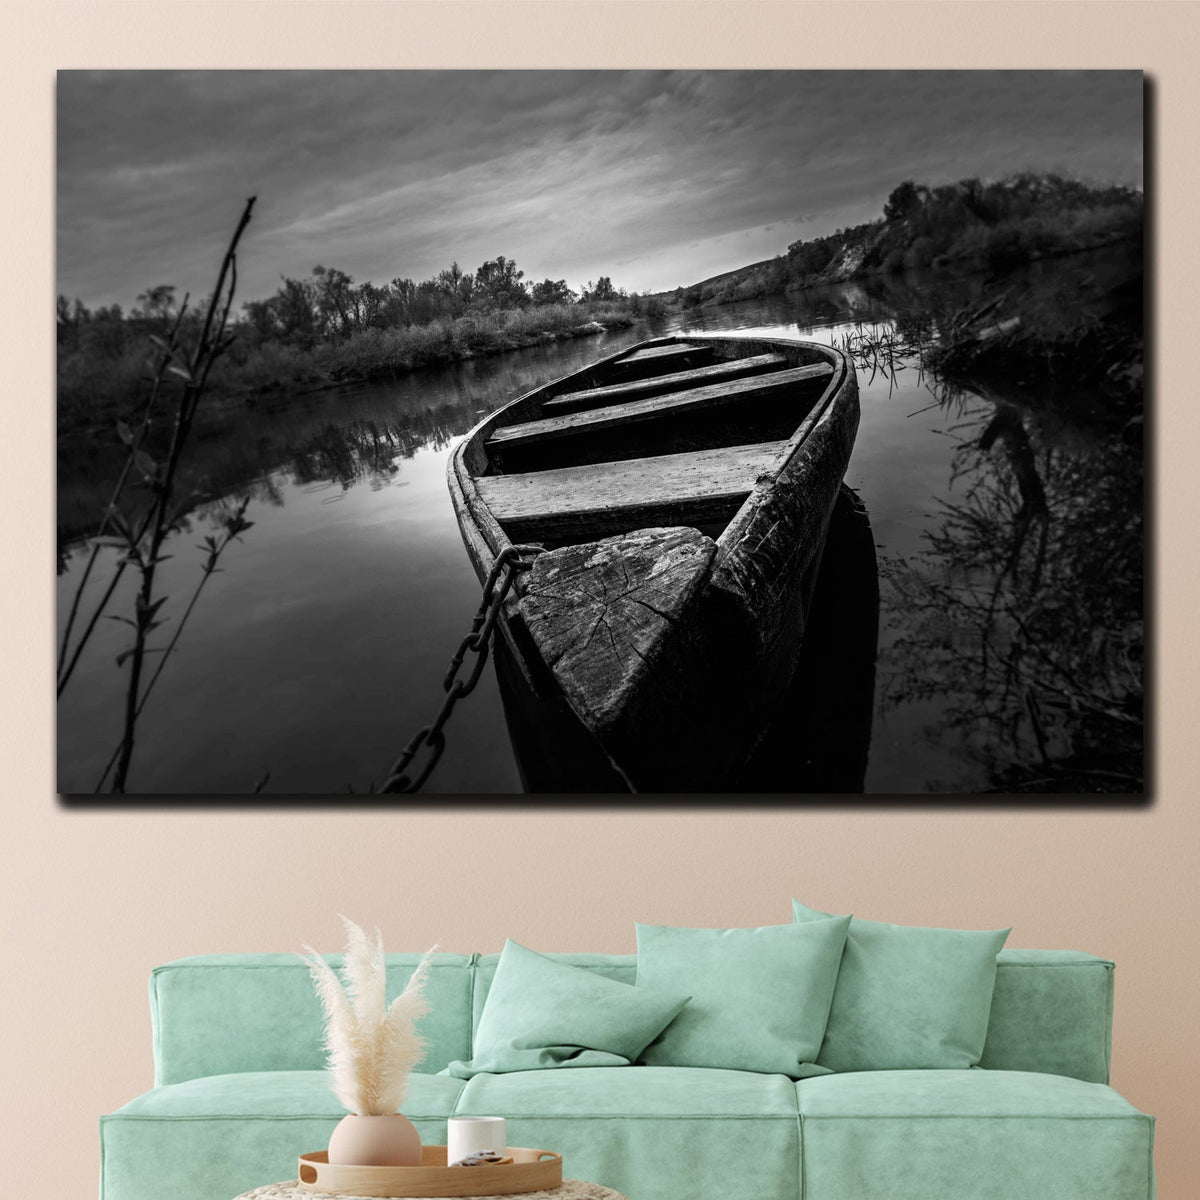 https://cdn.shopify.com/s/files/1/0387/9986/8044/products/SolitaryBoatCanvasArtprintStretched-4.jpg